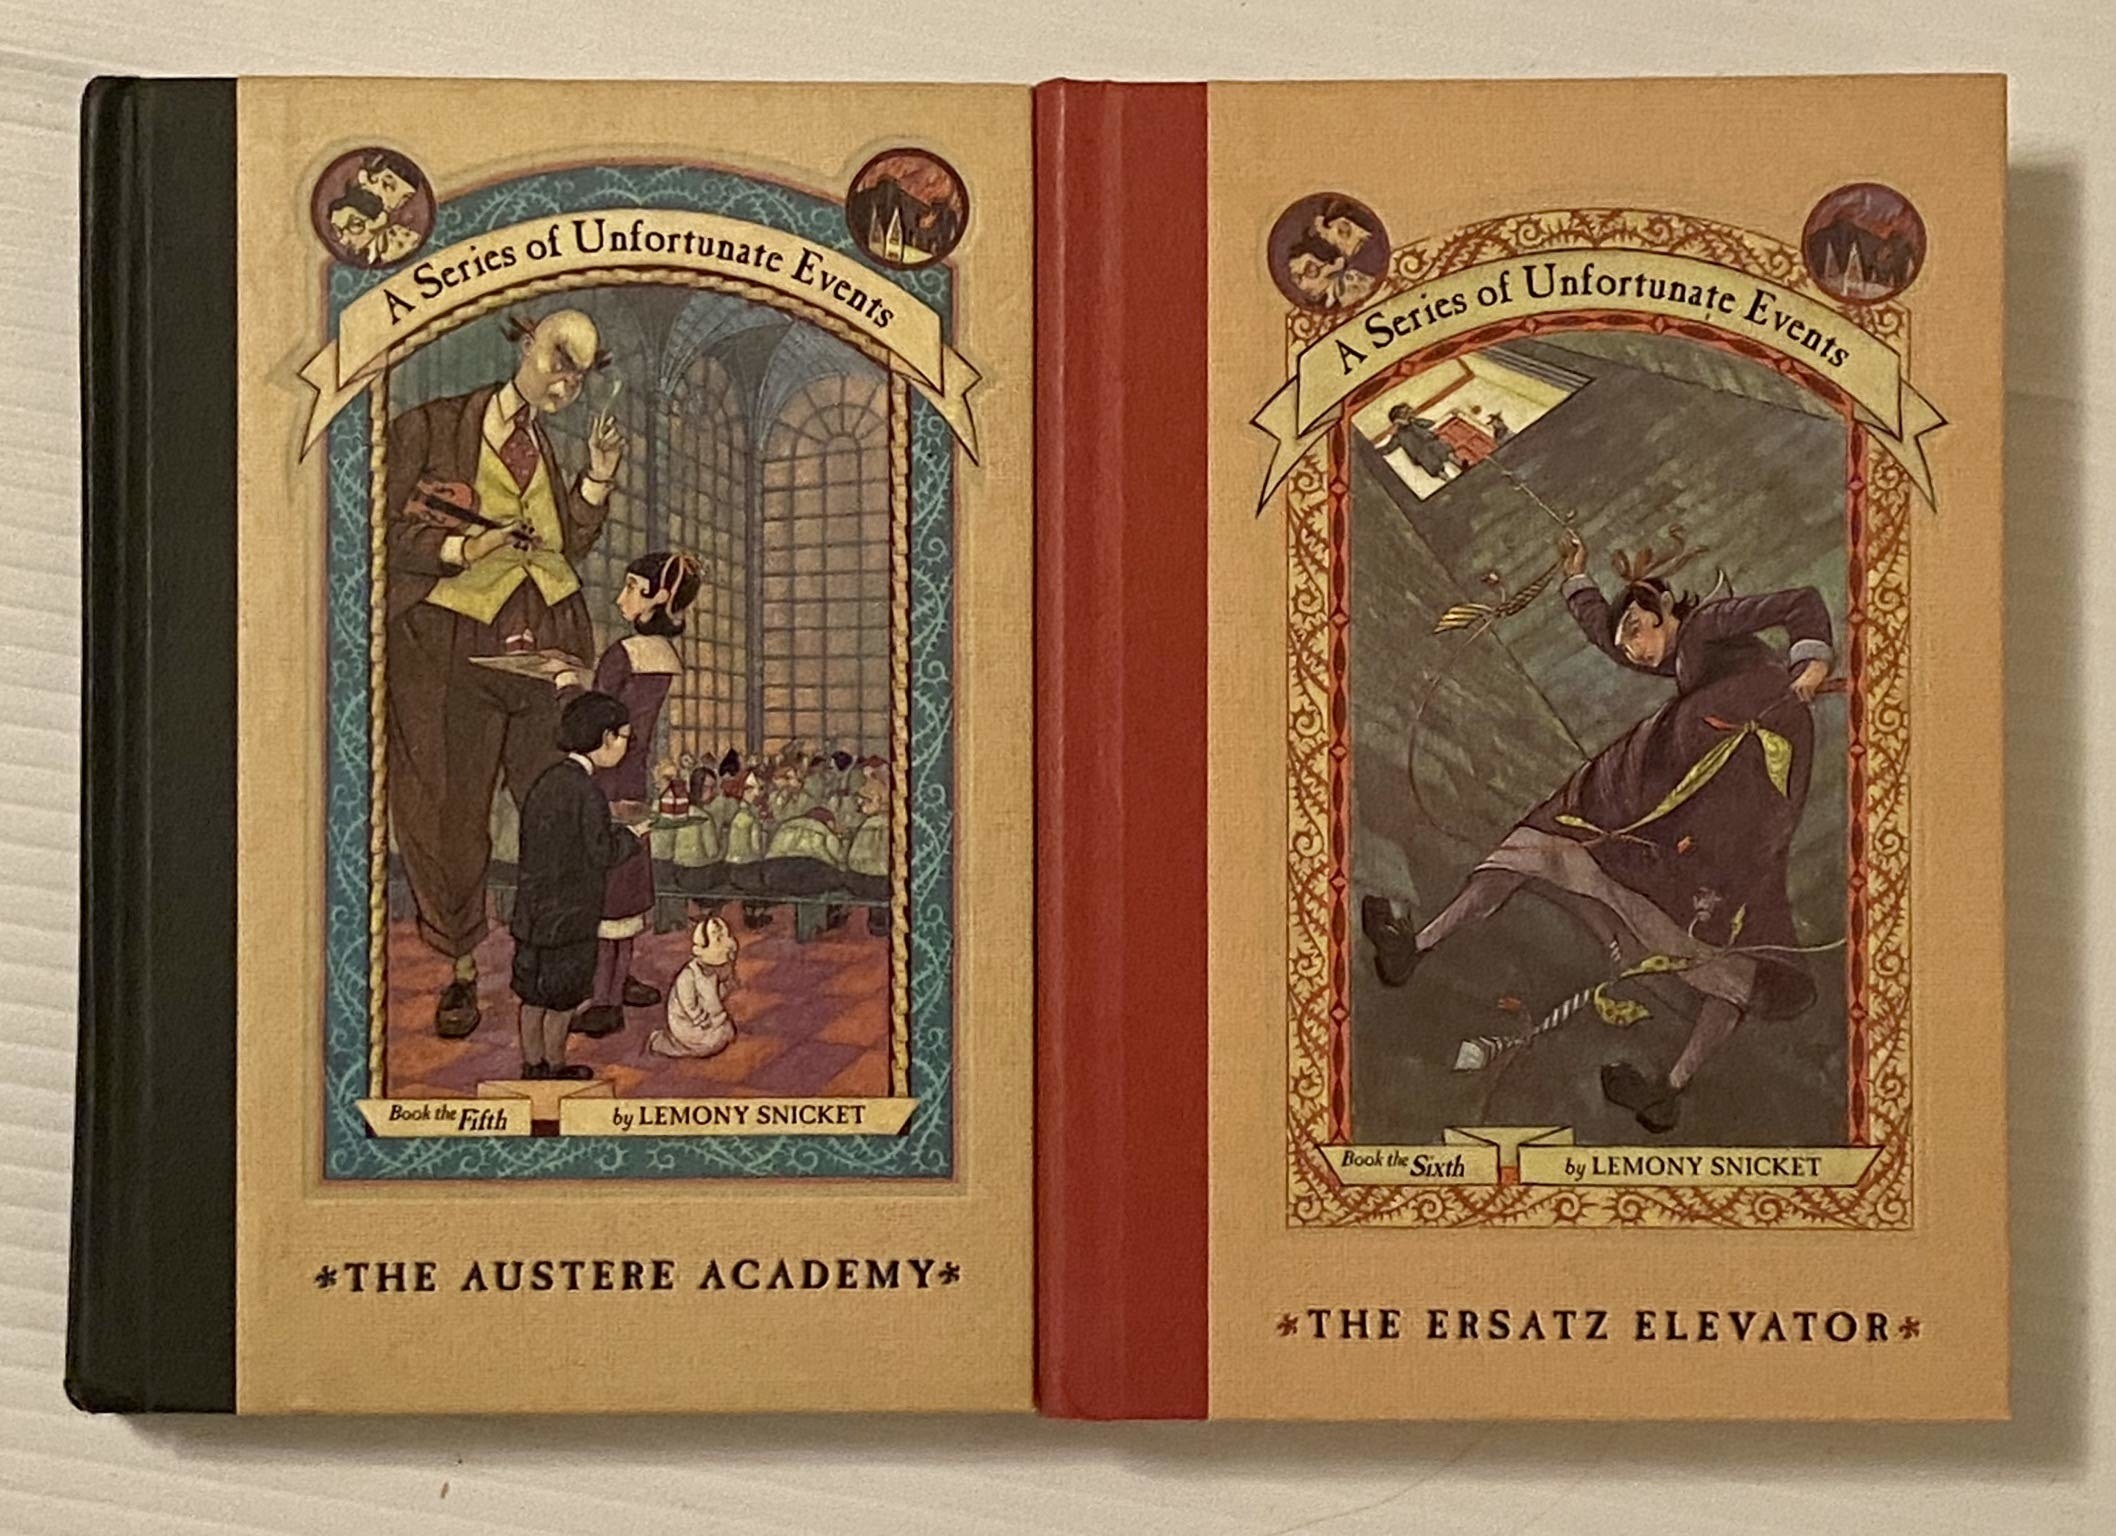 Two Series of Unfortunate Events books side by side. One with green spine, one red